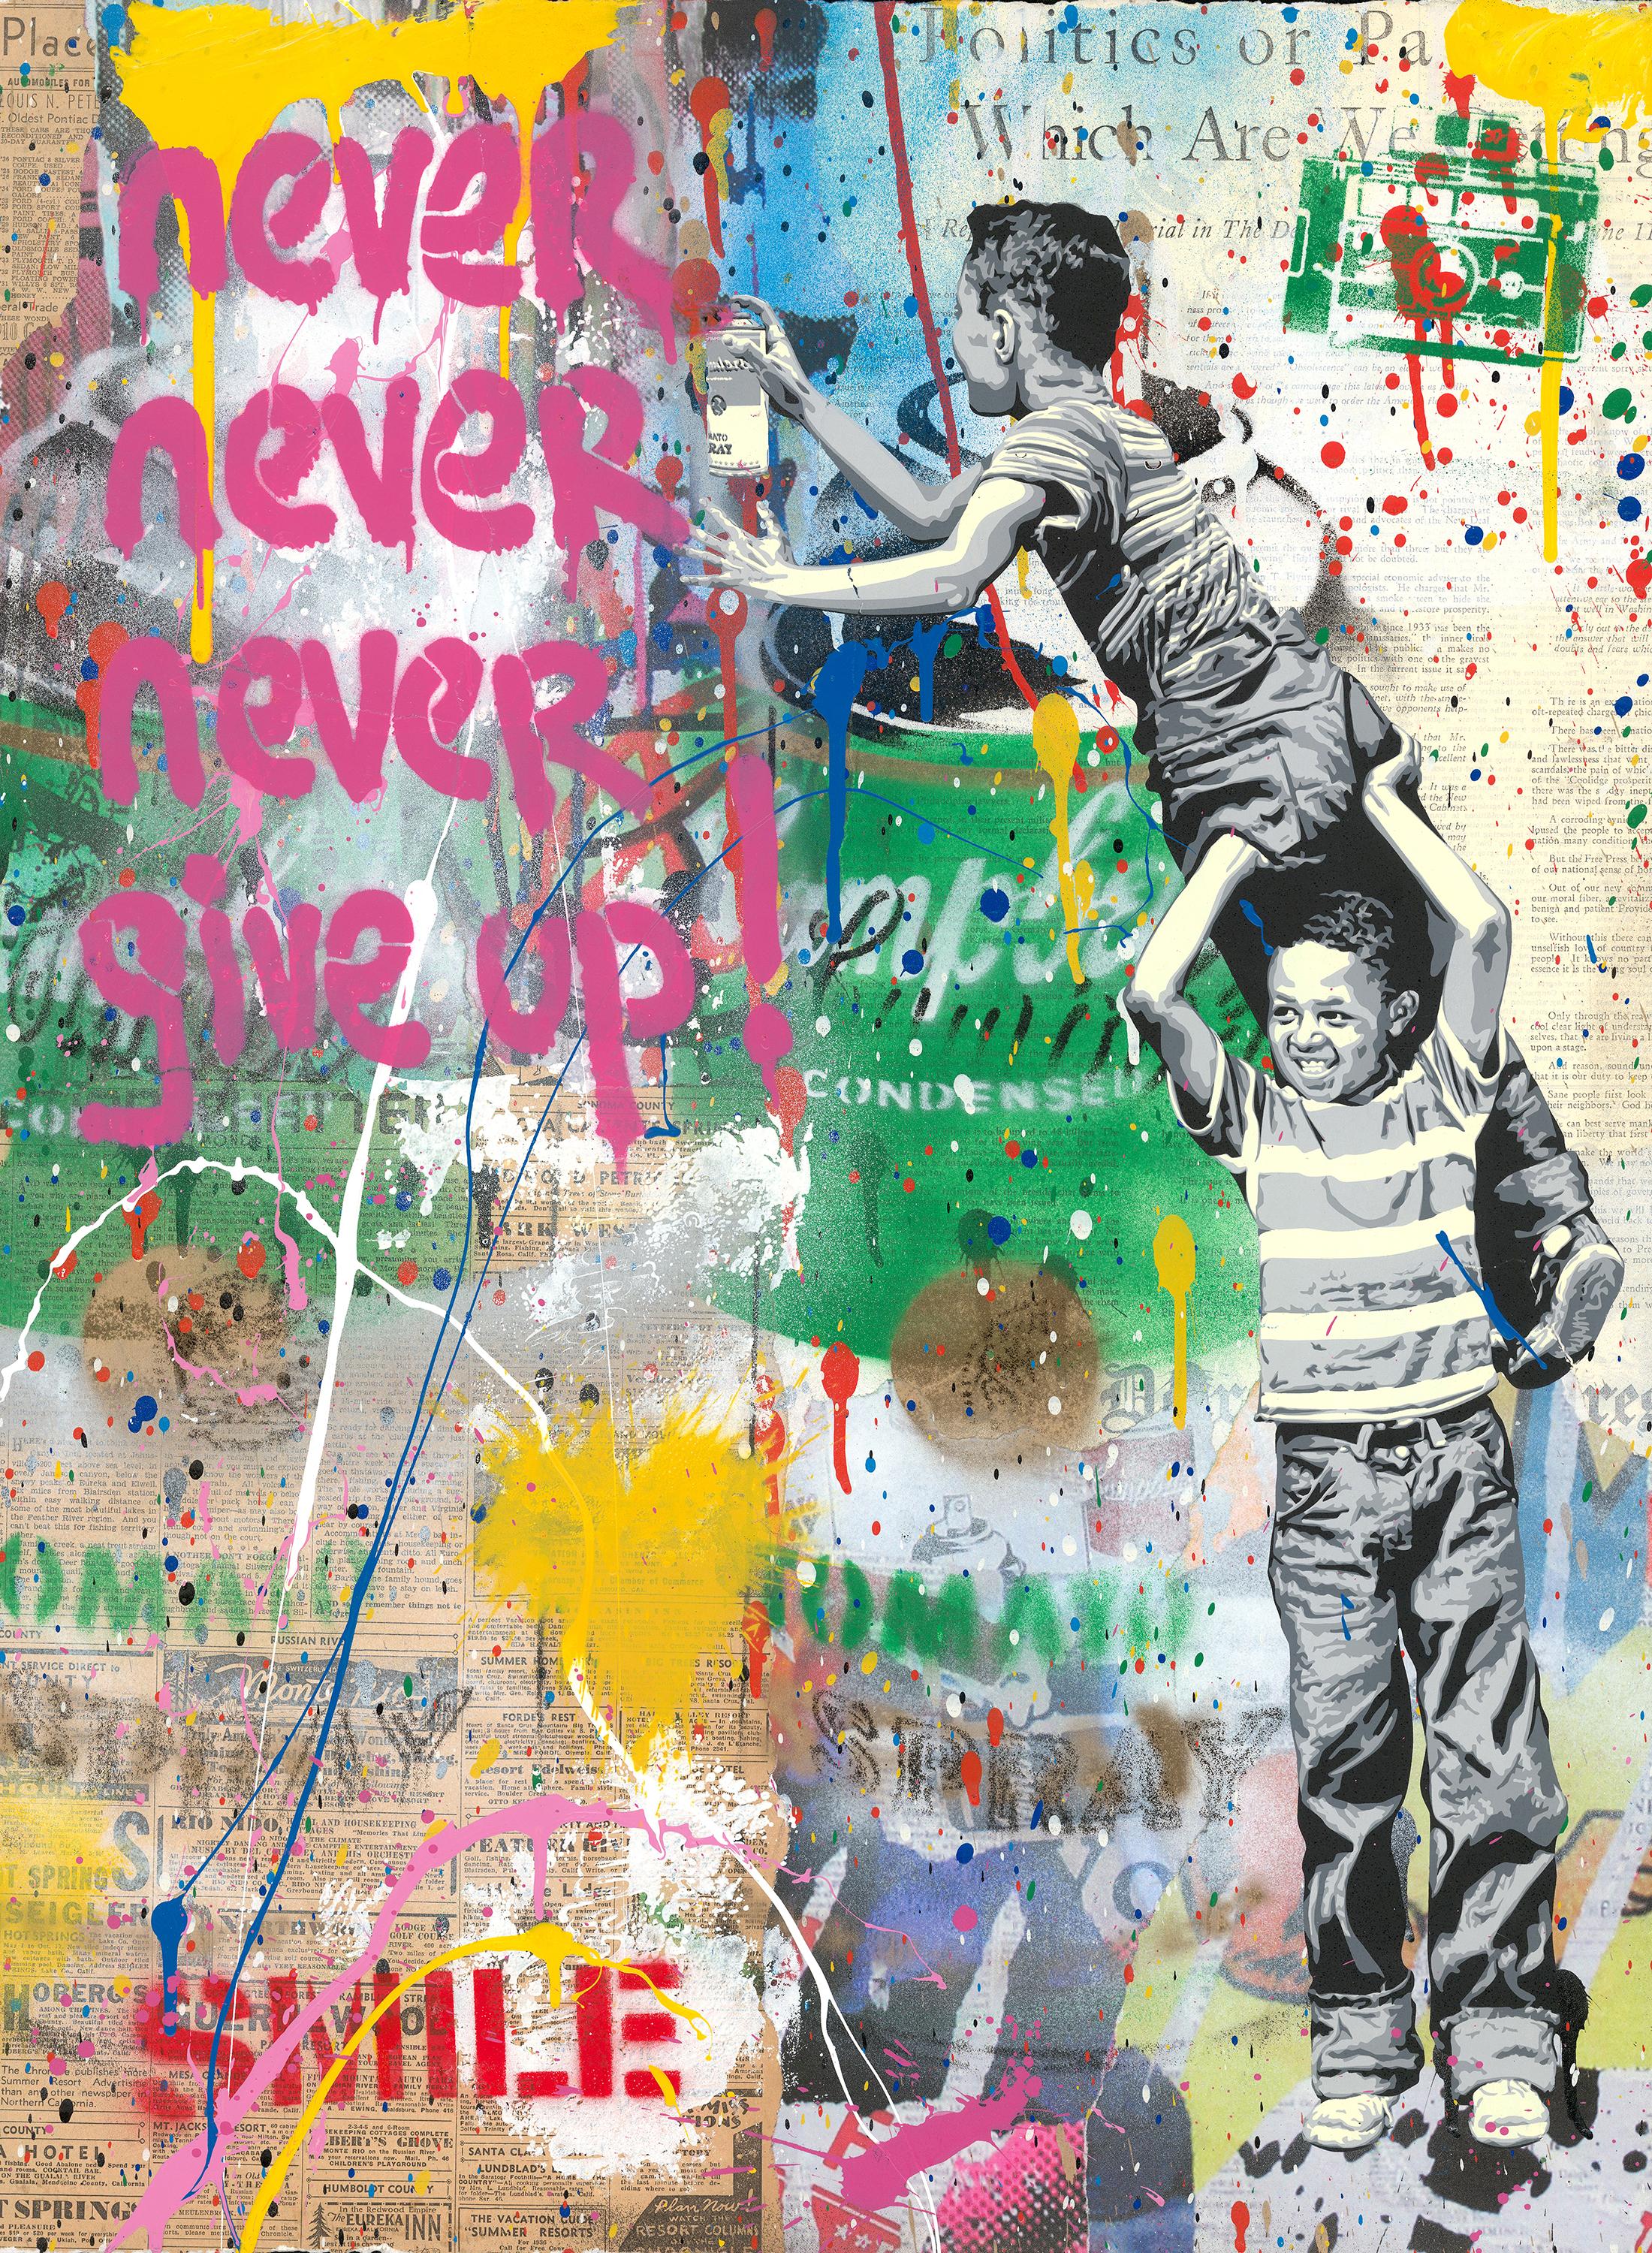 Never, Never Give Up - Mixed Media Art by Mr. Brainwash